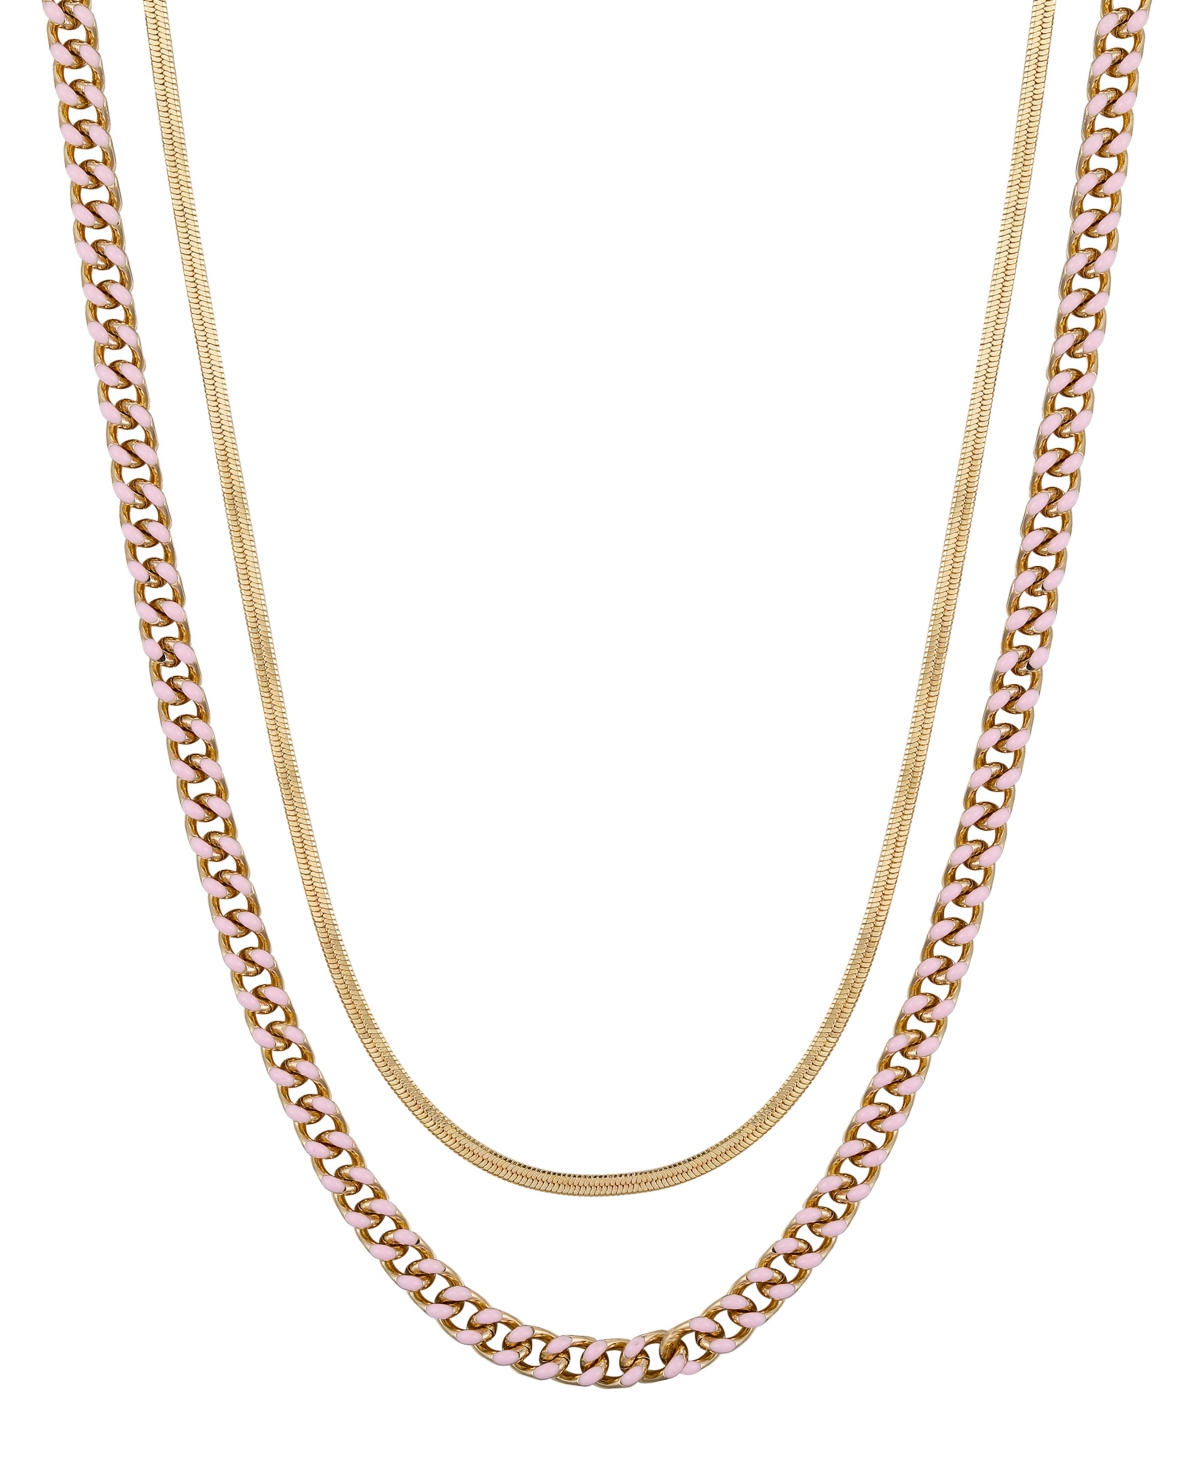 Unwritten 14k Gold Flash-plated Light Pink Enamel Curb Chain And Herringbone Chain Necklace Set